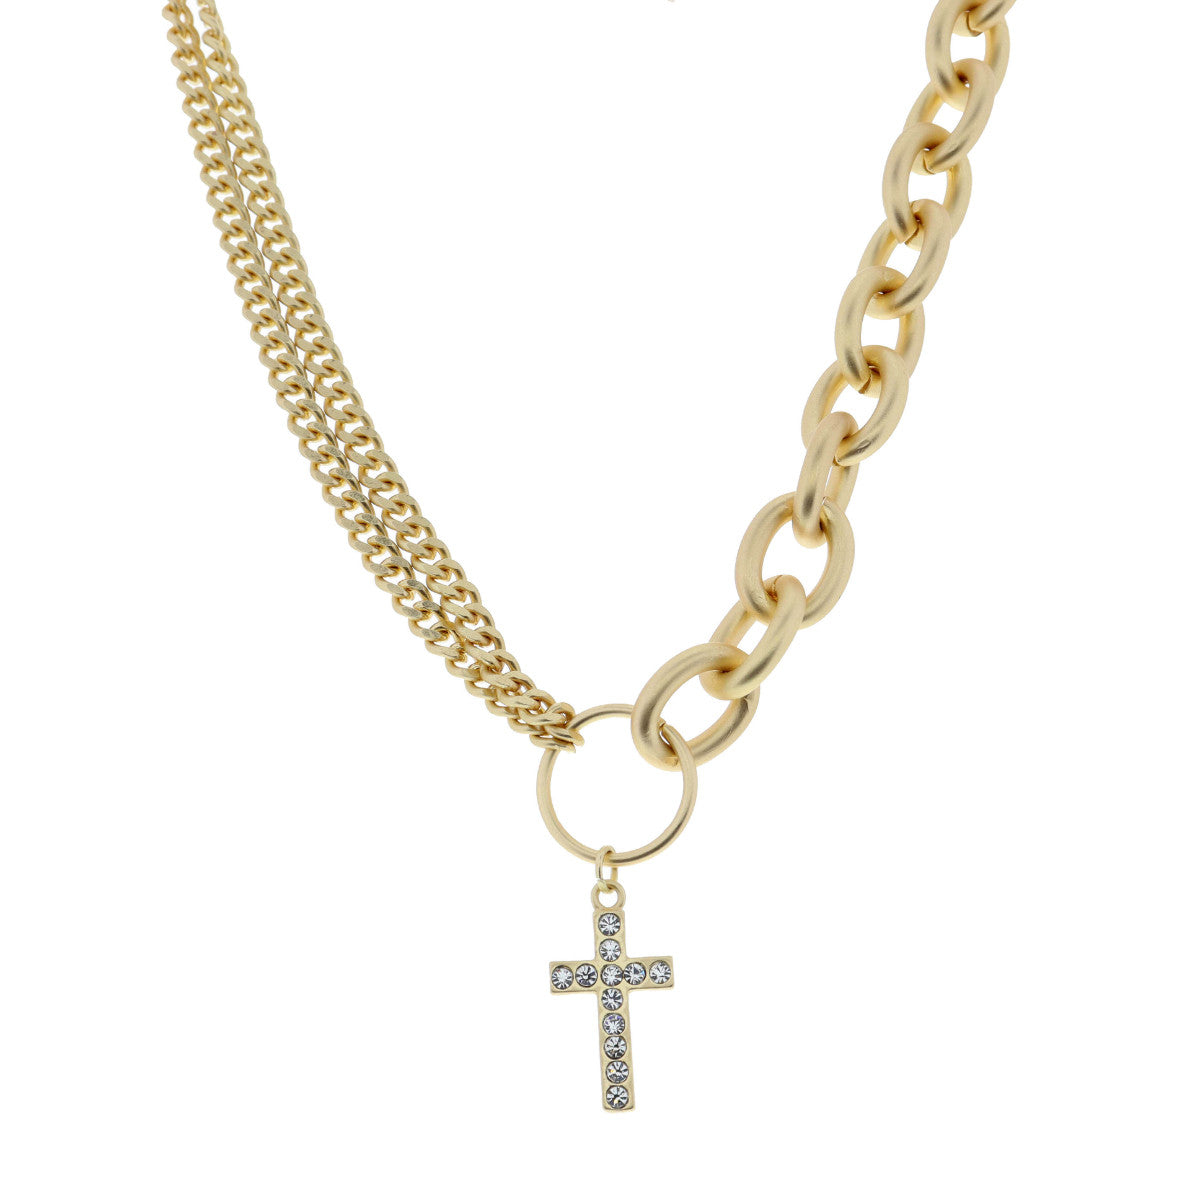 Crystal Cross Necklace in Gold